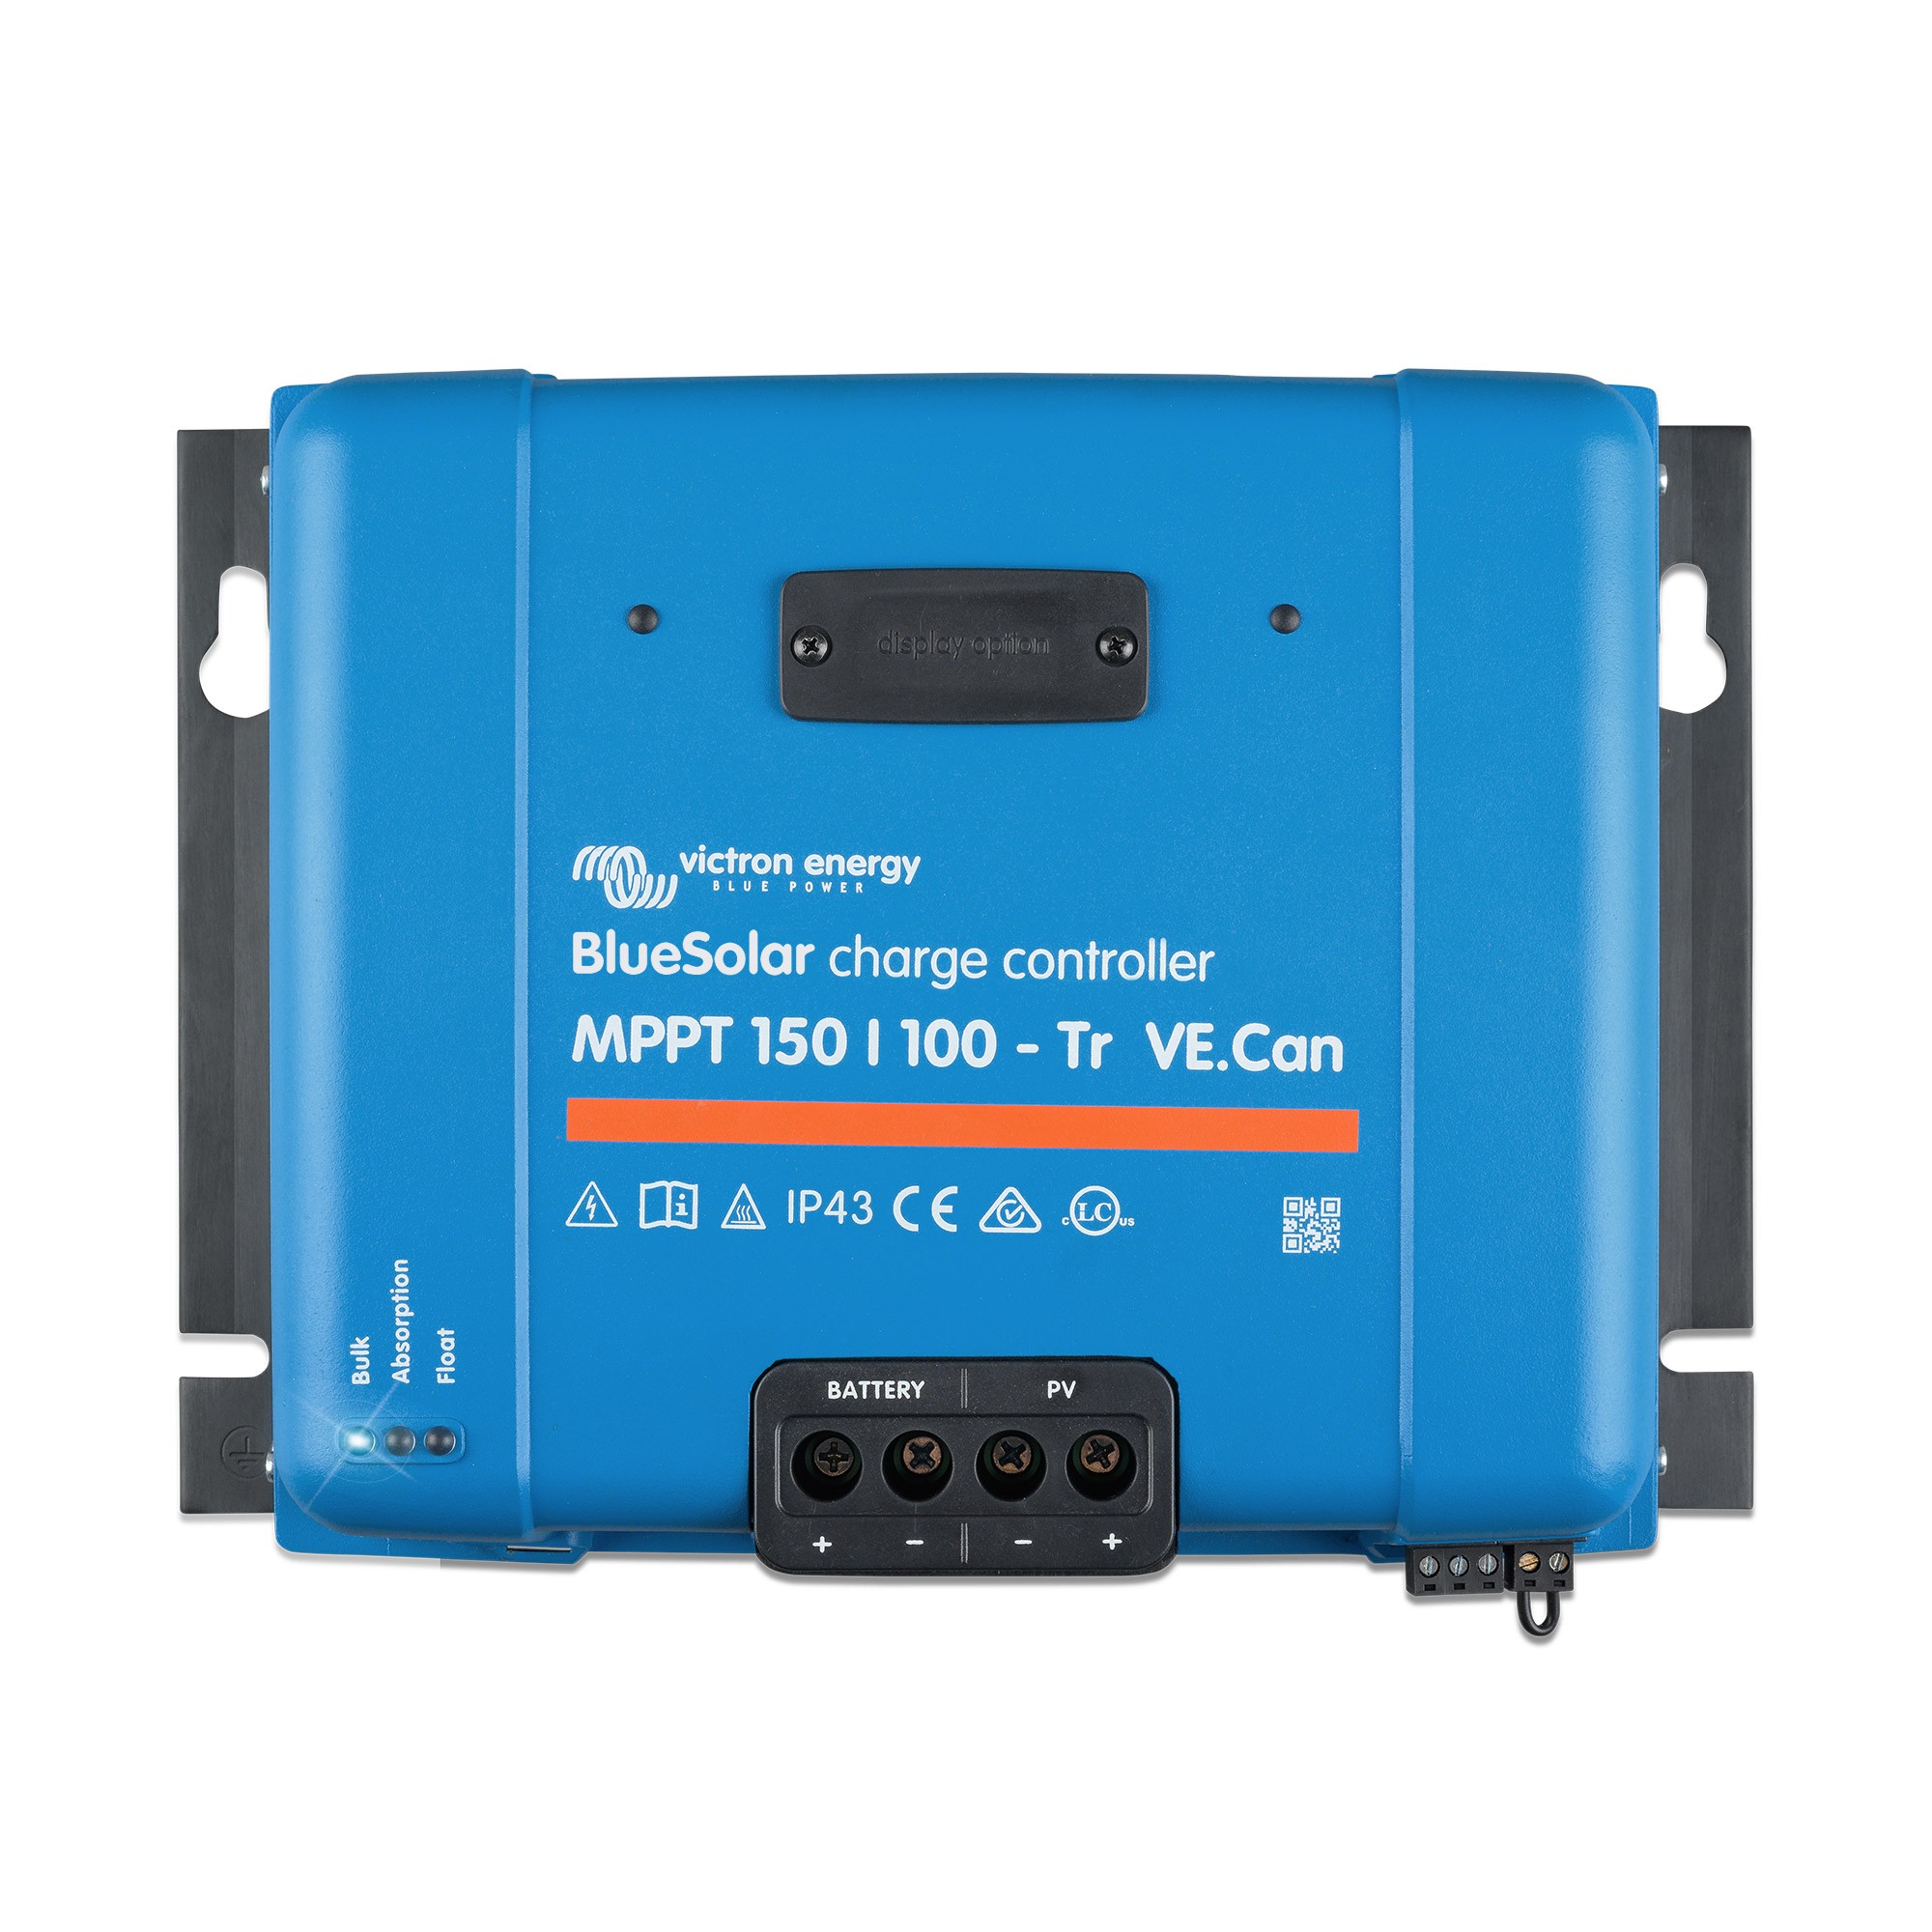 BlueSolar MPPT 150/100-Tr VE.Can charge controller Victron Energy